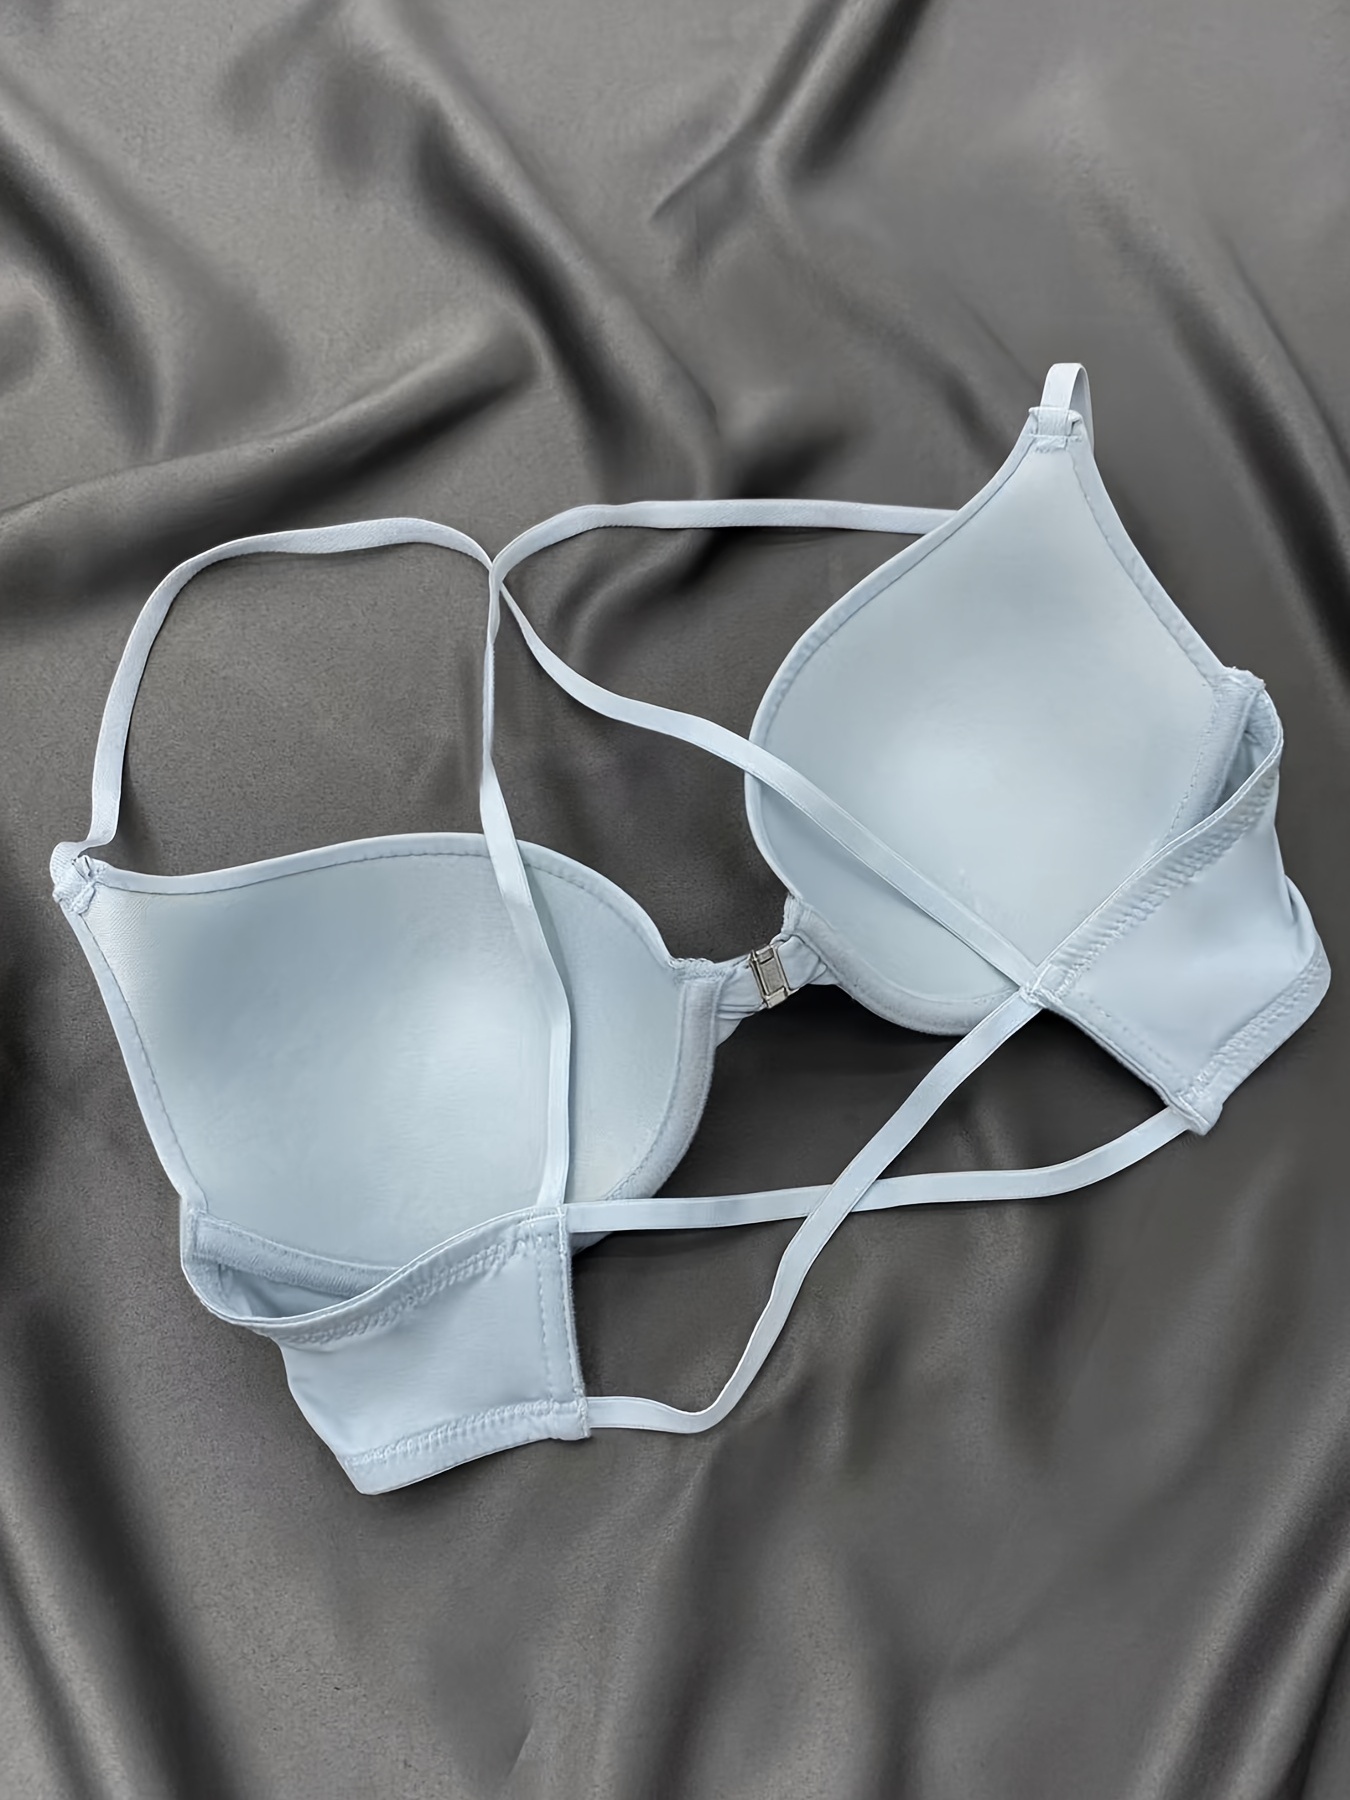 Track Bombshell Add-2-Cups Push-Up Bra - VS White - 32-D at Victoria's